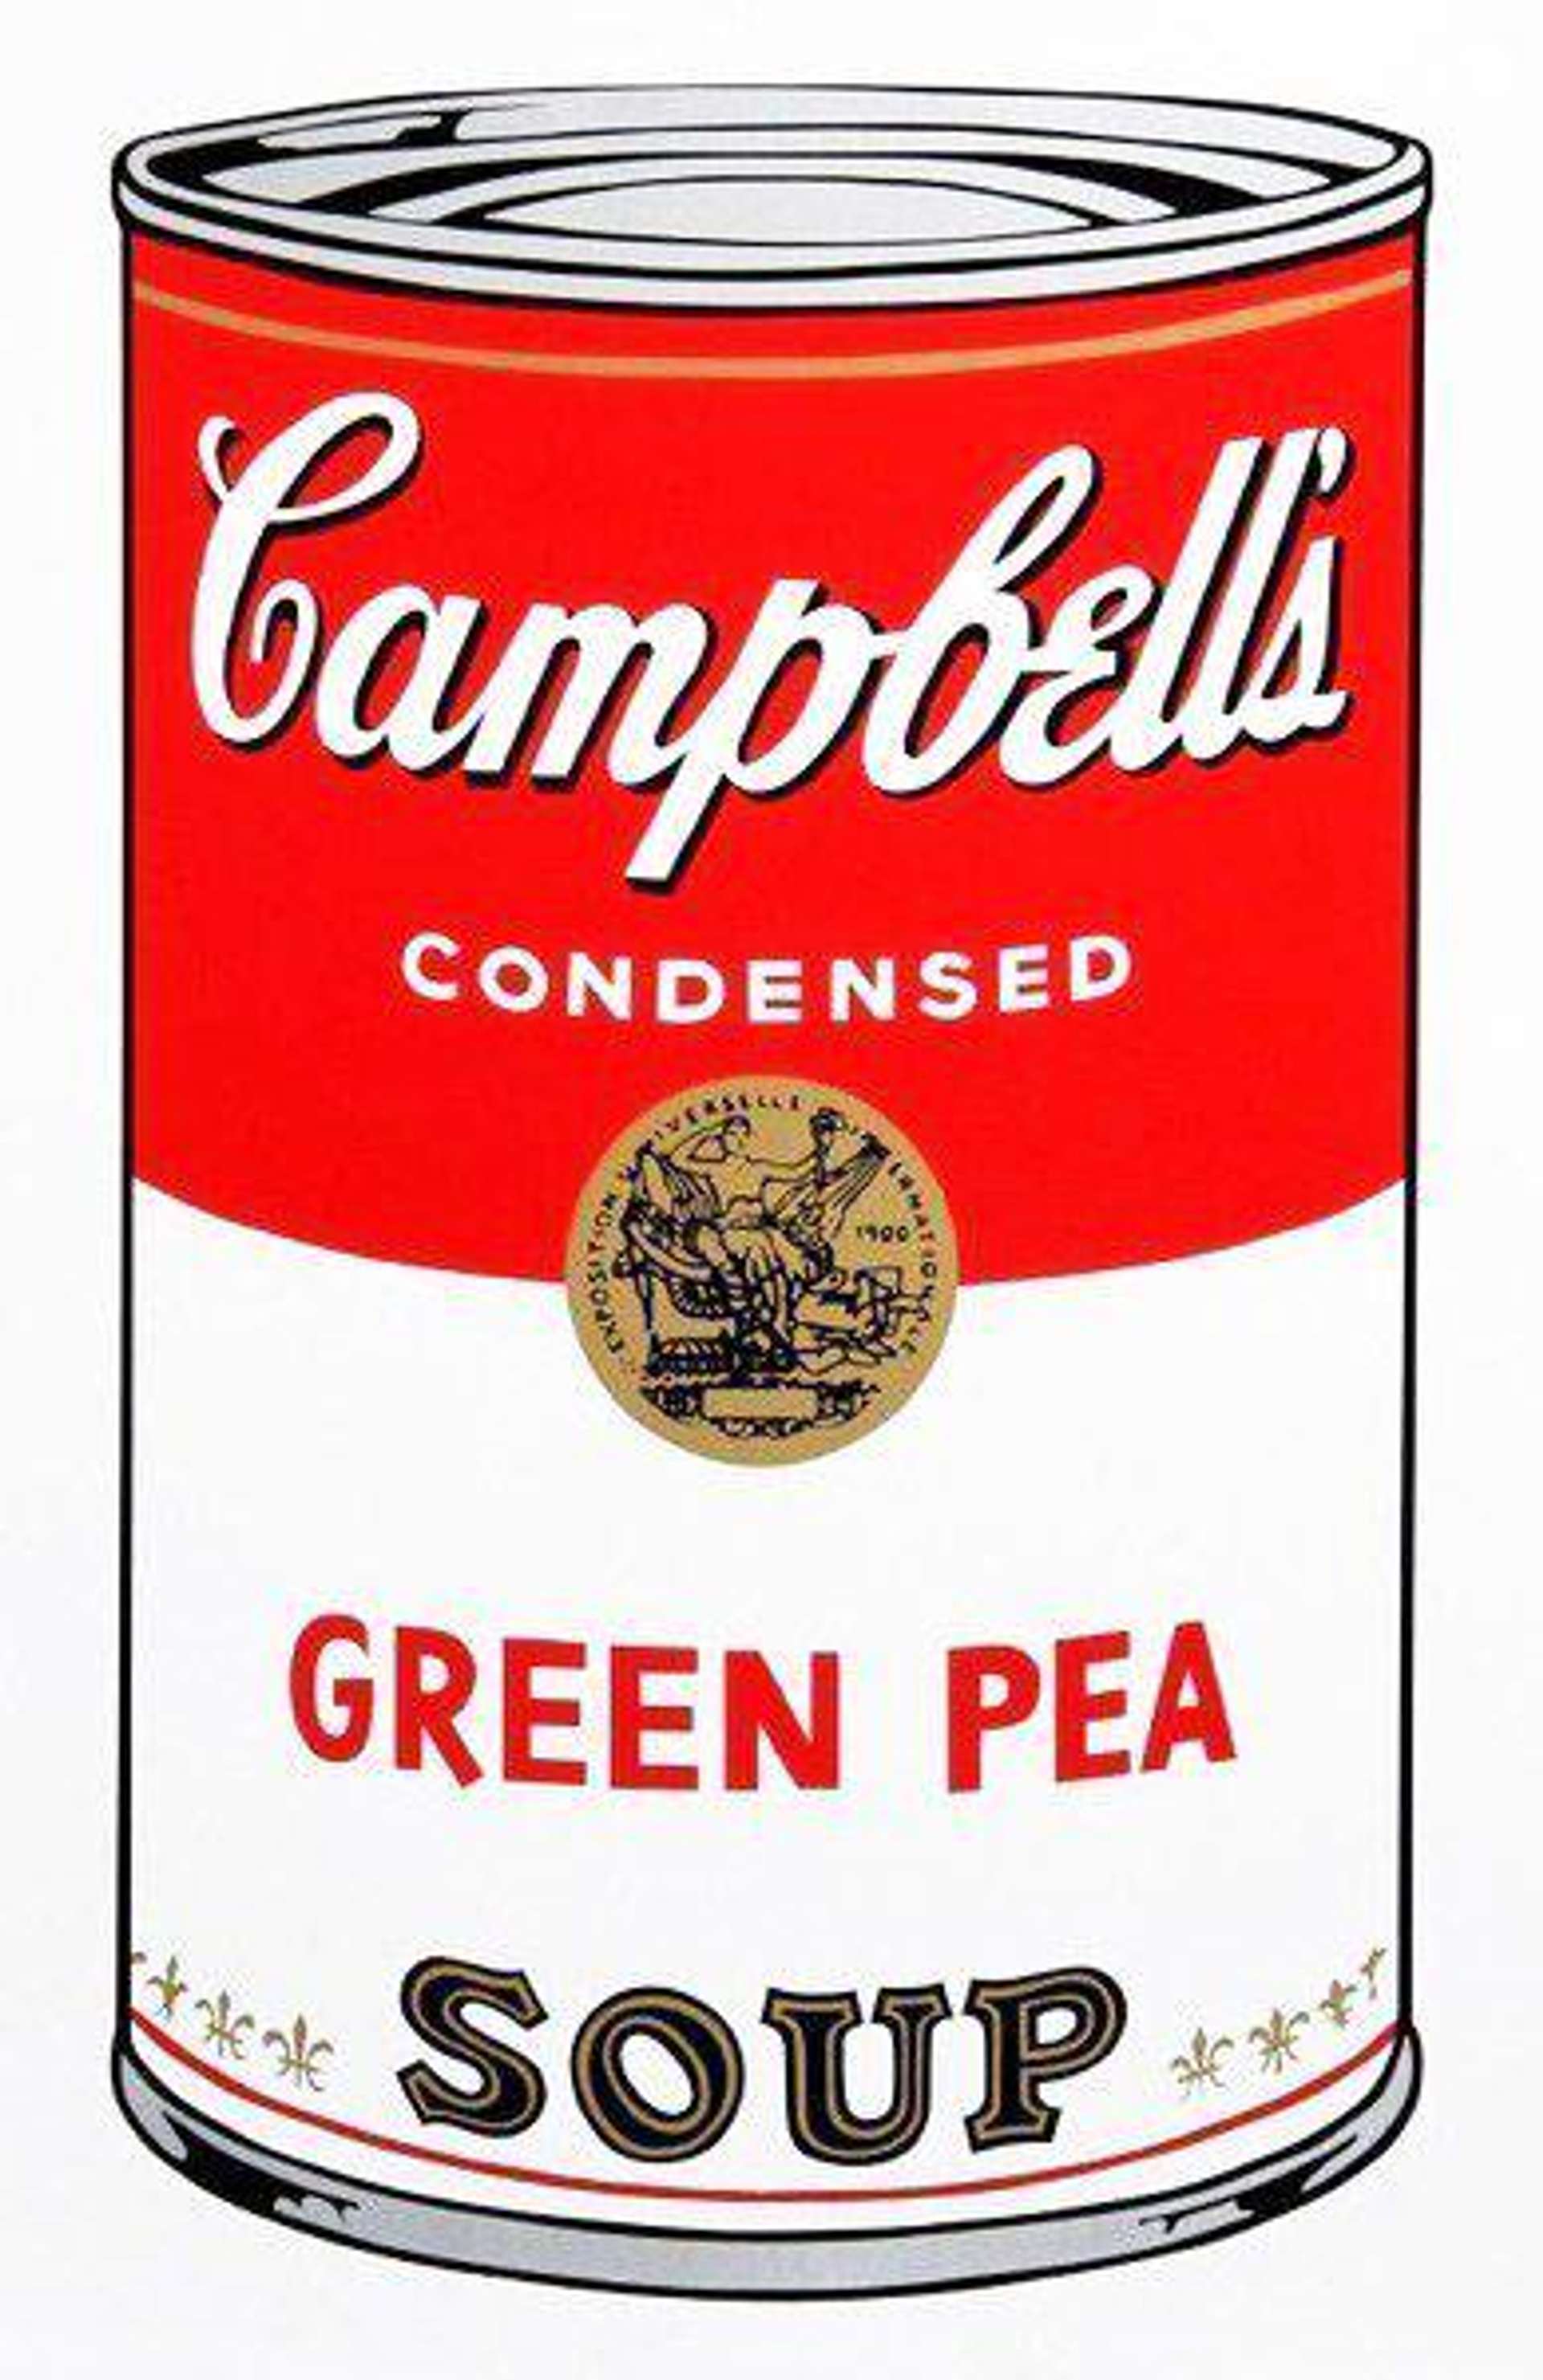 Campbell’s Soup I, Green Pea (F. & S. II.50) by Andy Warhol - MyArtBroker